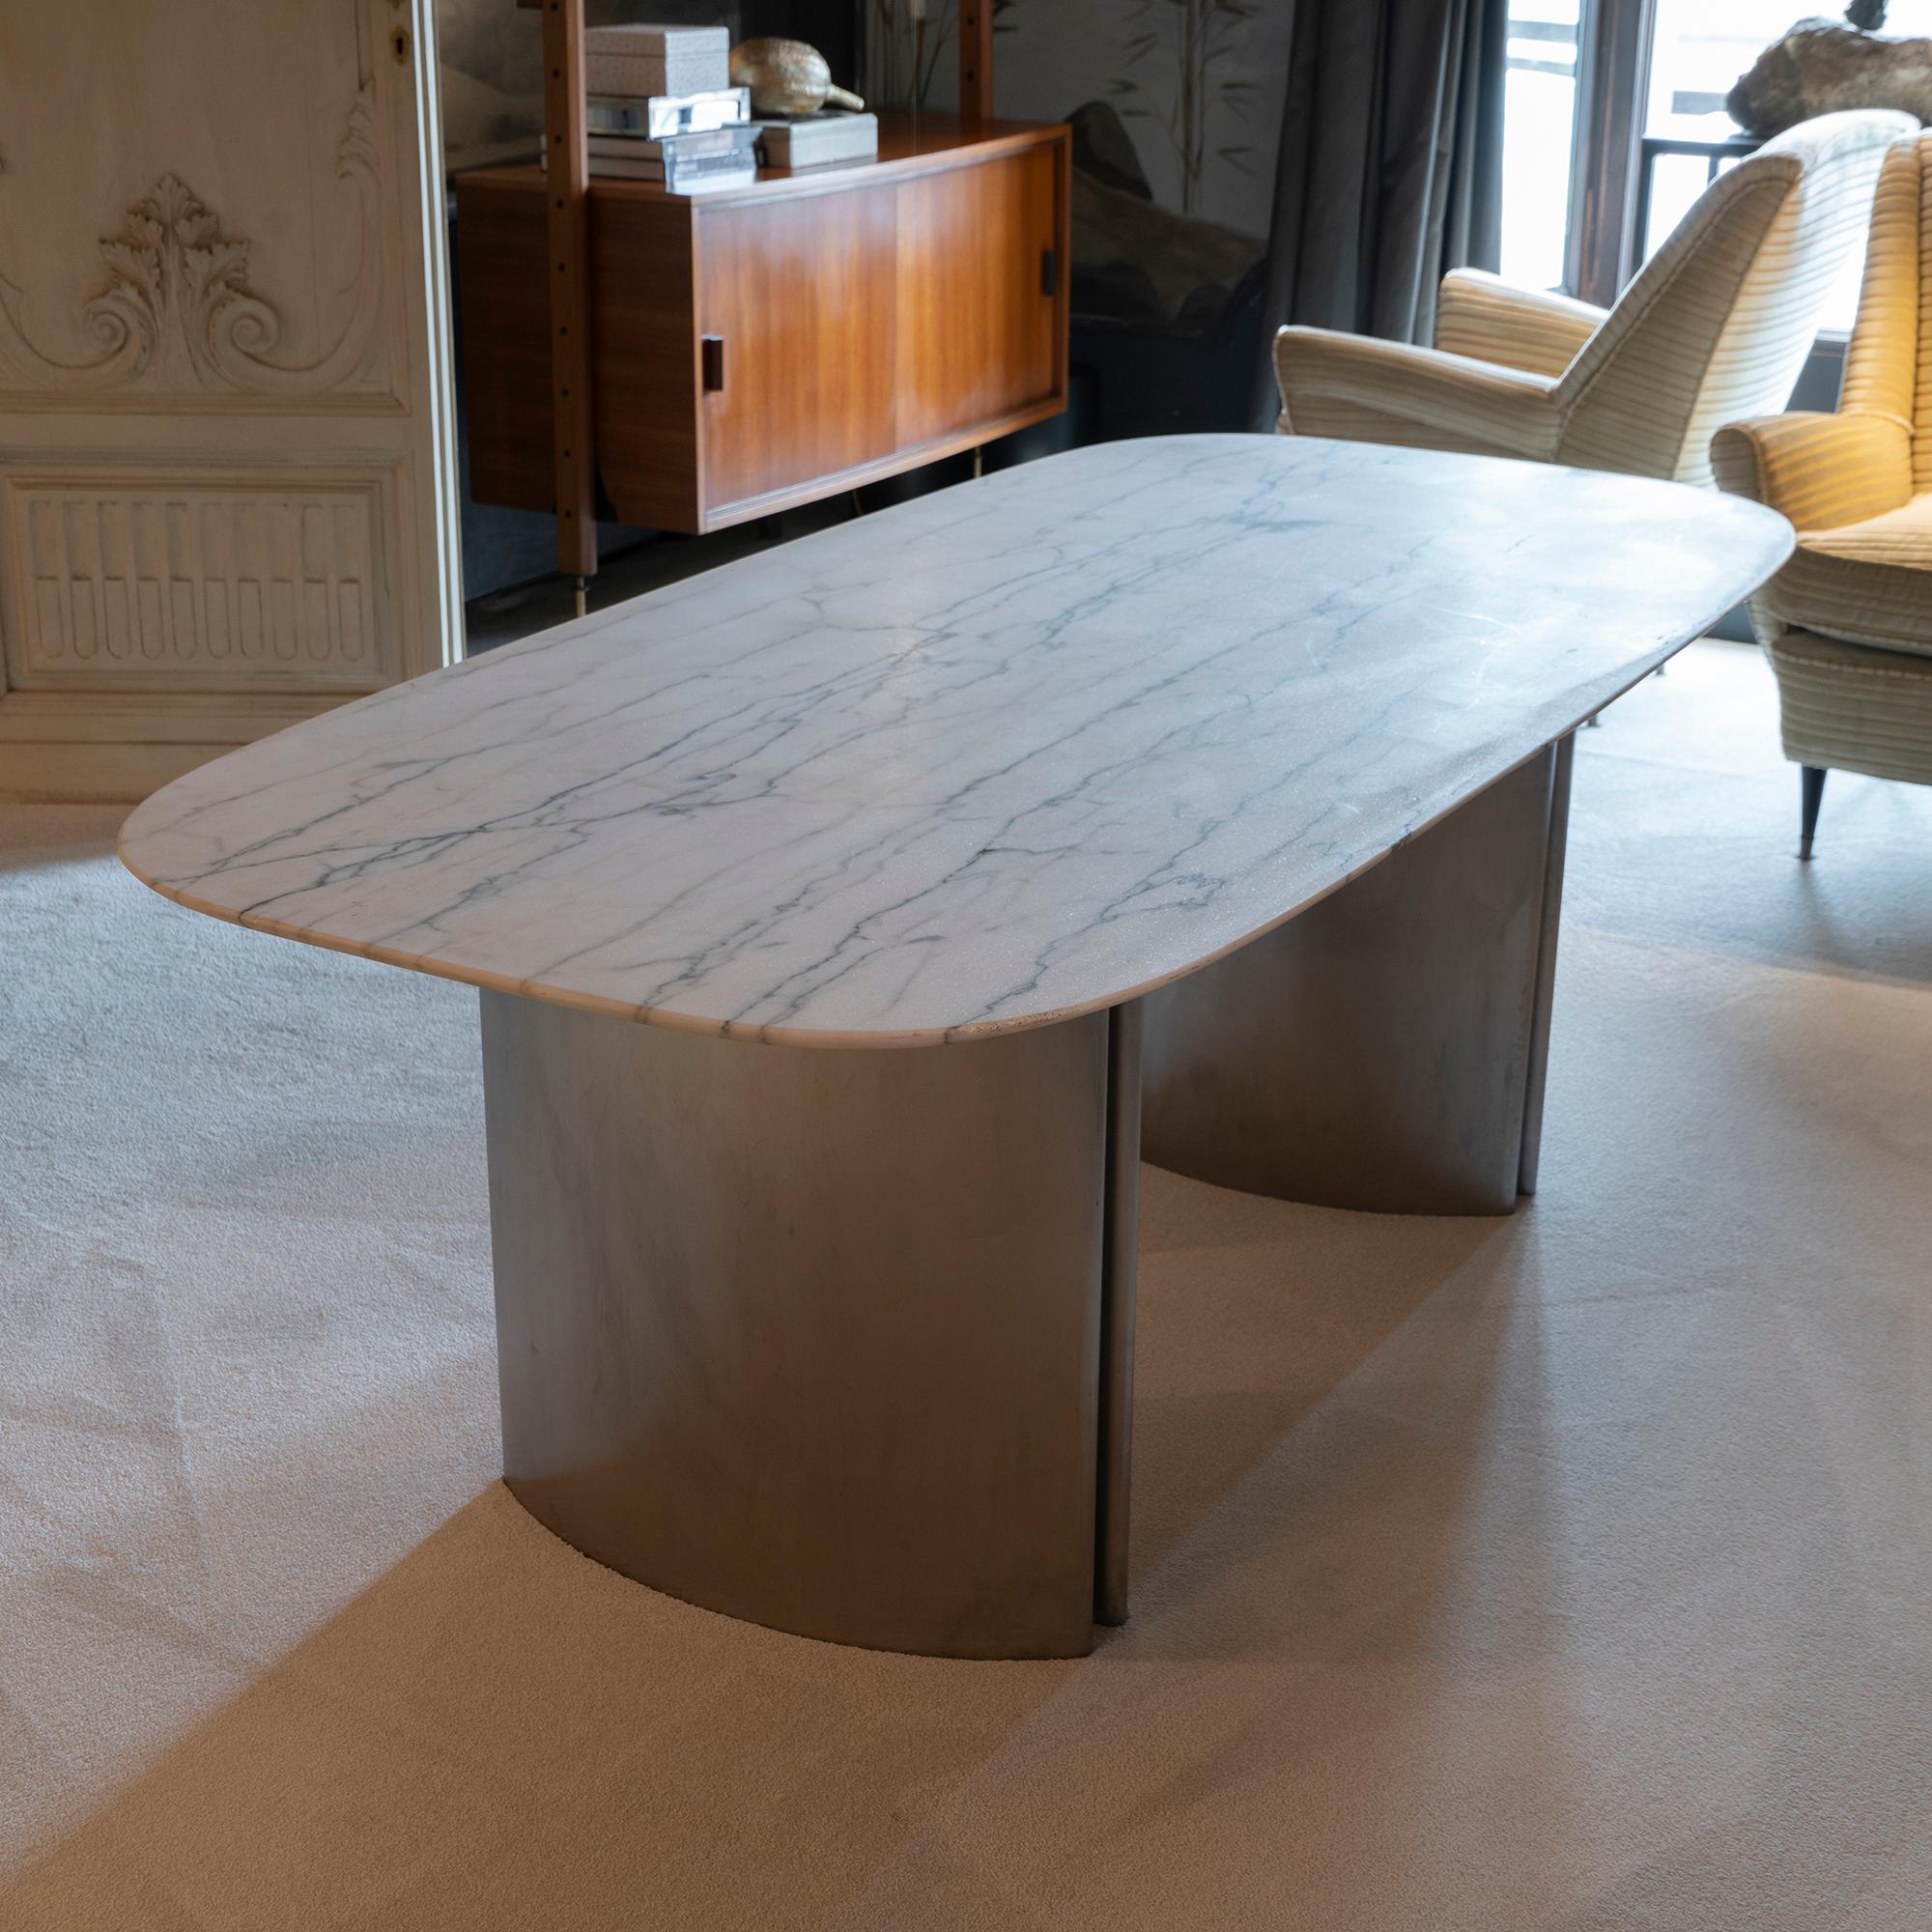 Stainless Steel 1970's Italian Dining Table Brushed Chrome Base and White Statuario Marble Top